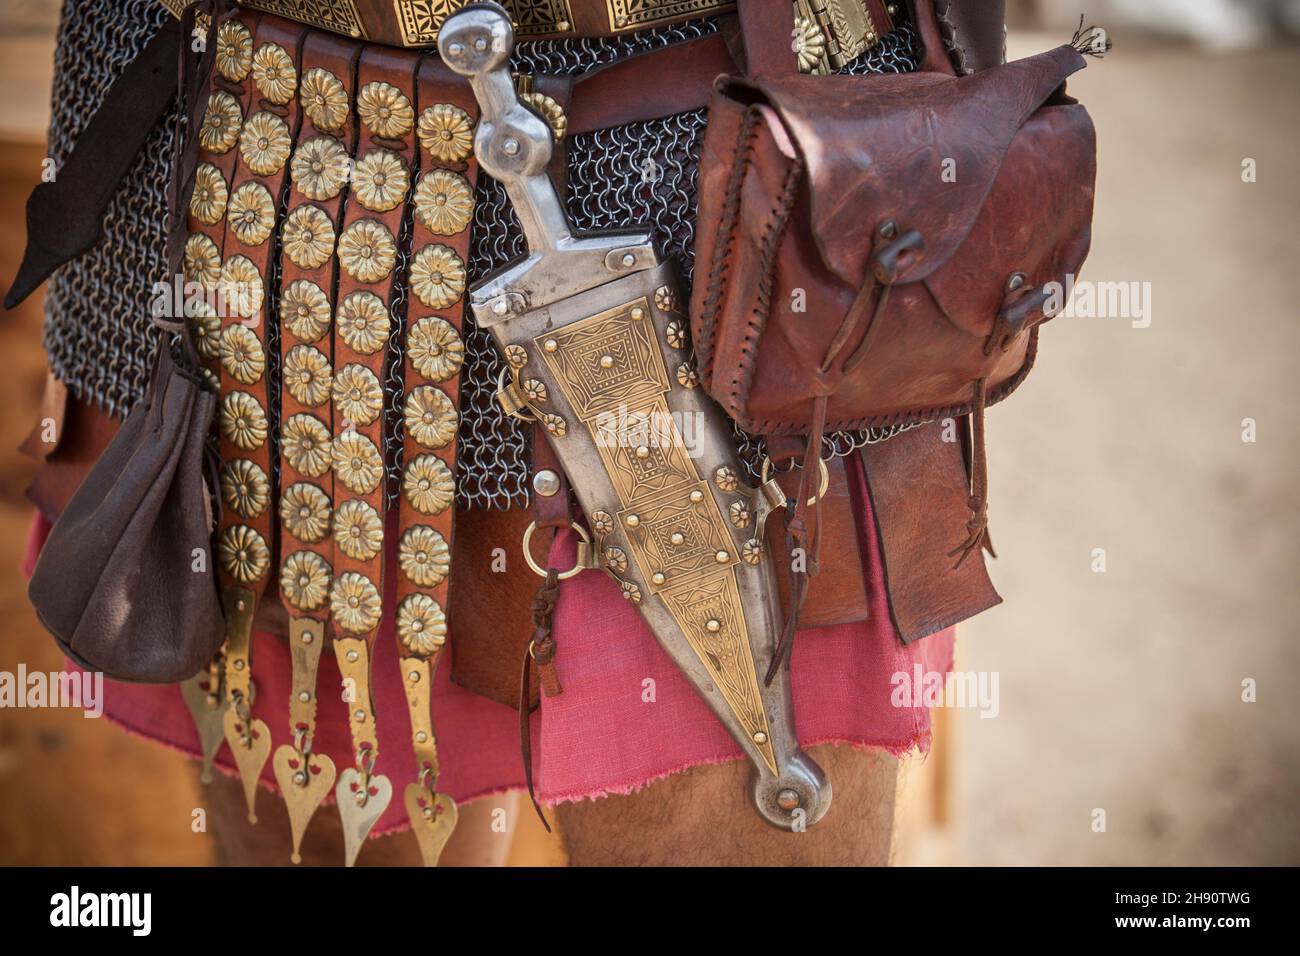 Centurion girding a pugio, a dagger used by roman soldiers as a sidearm. Historical reenactment. Stock Photo